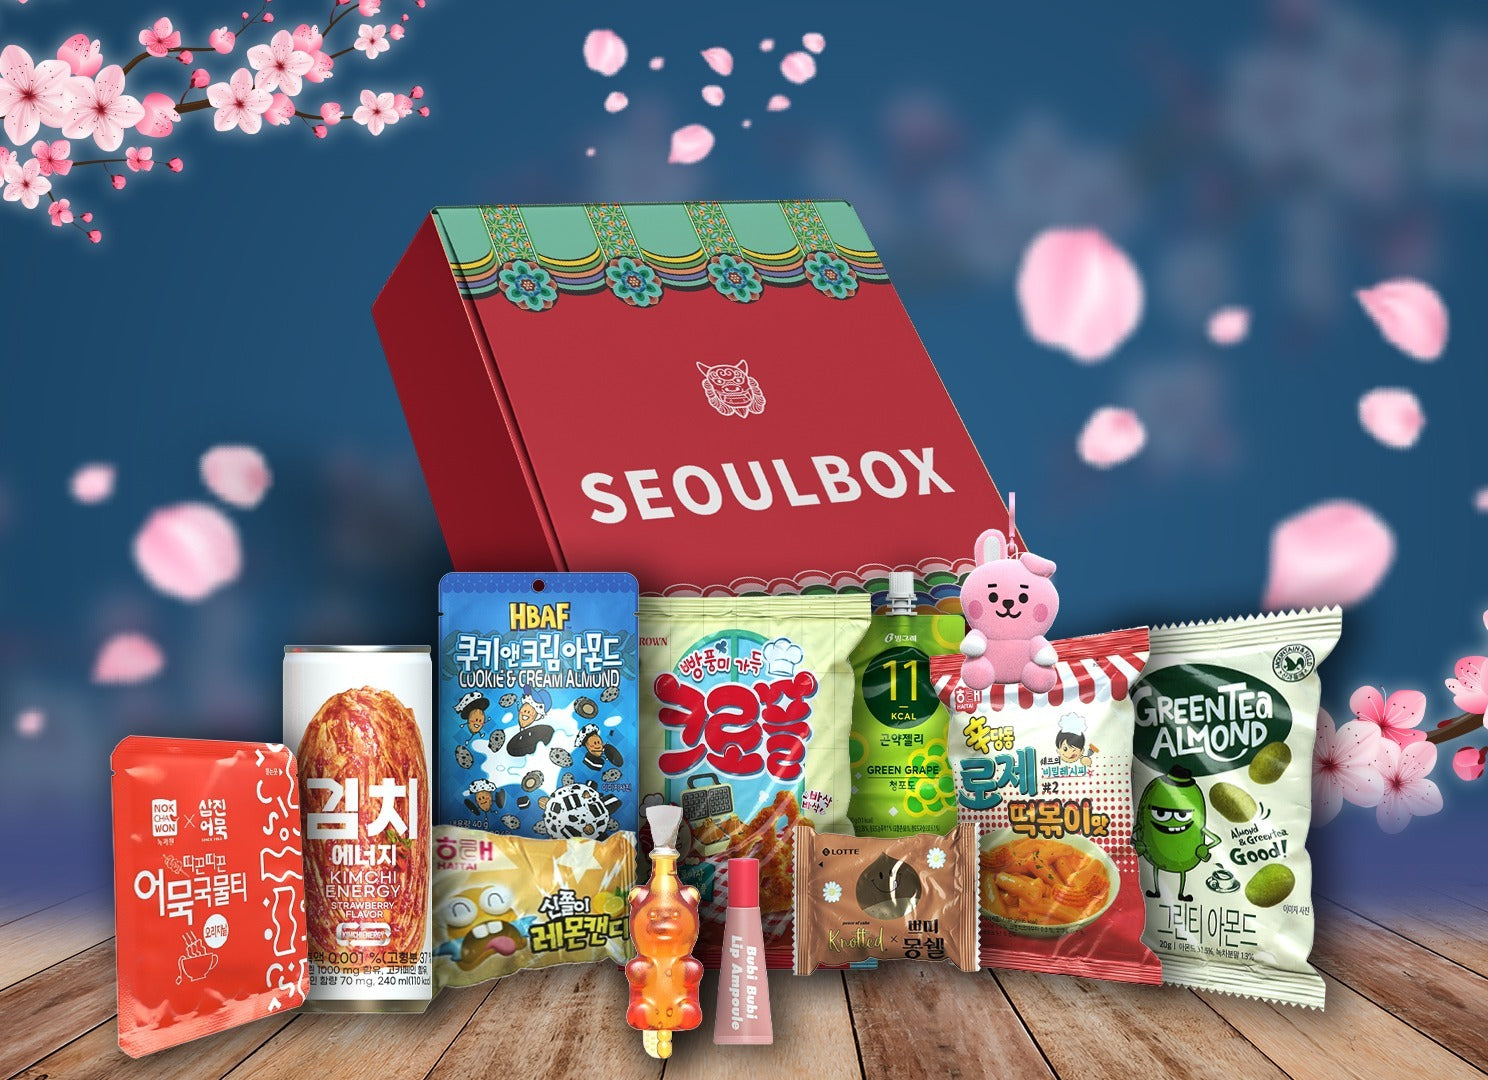 Korean snack subscription box with cherry blossoms